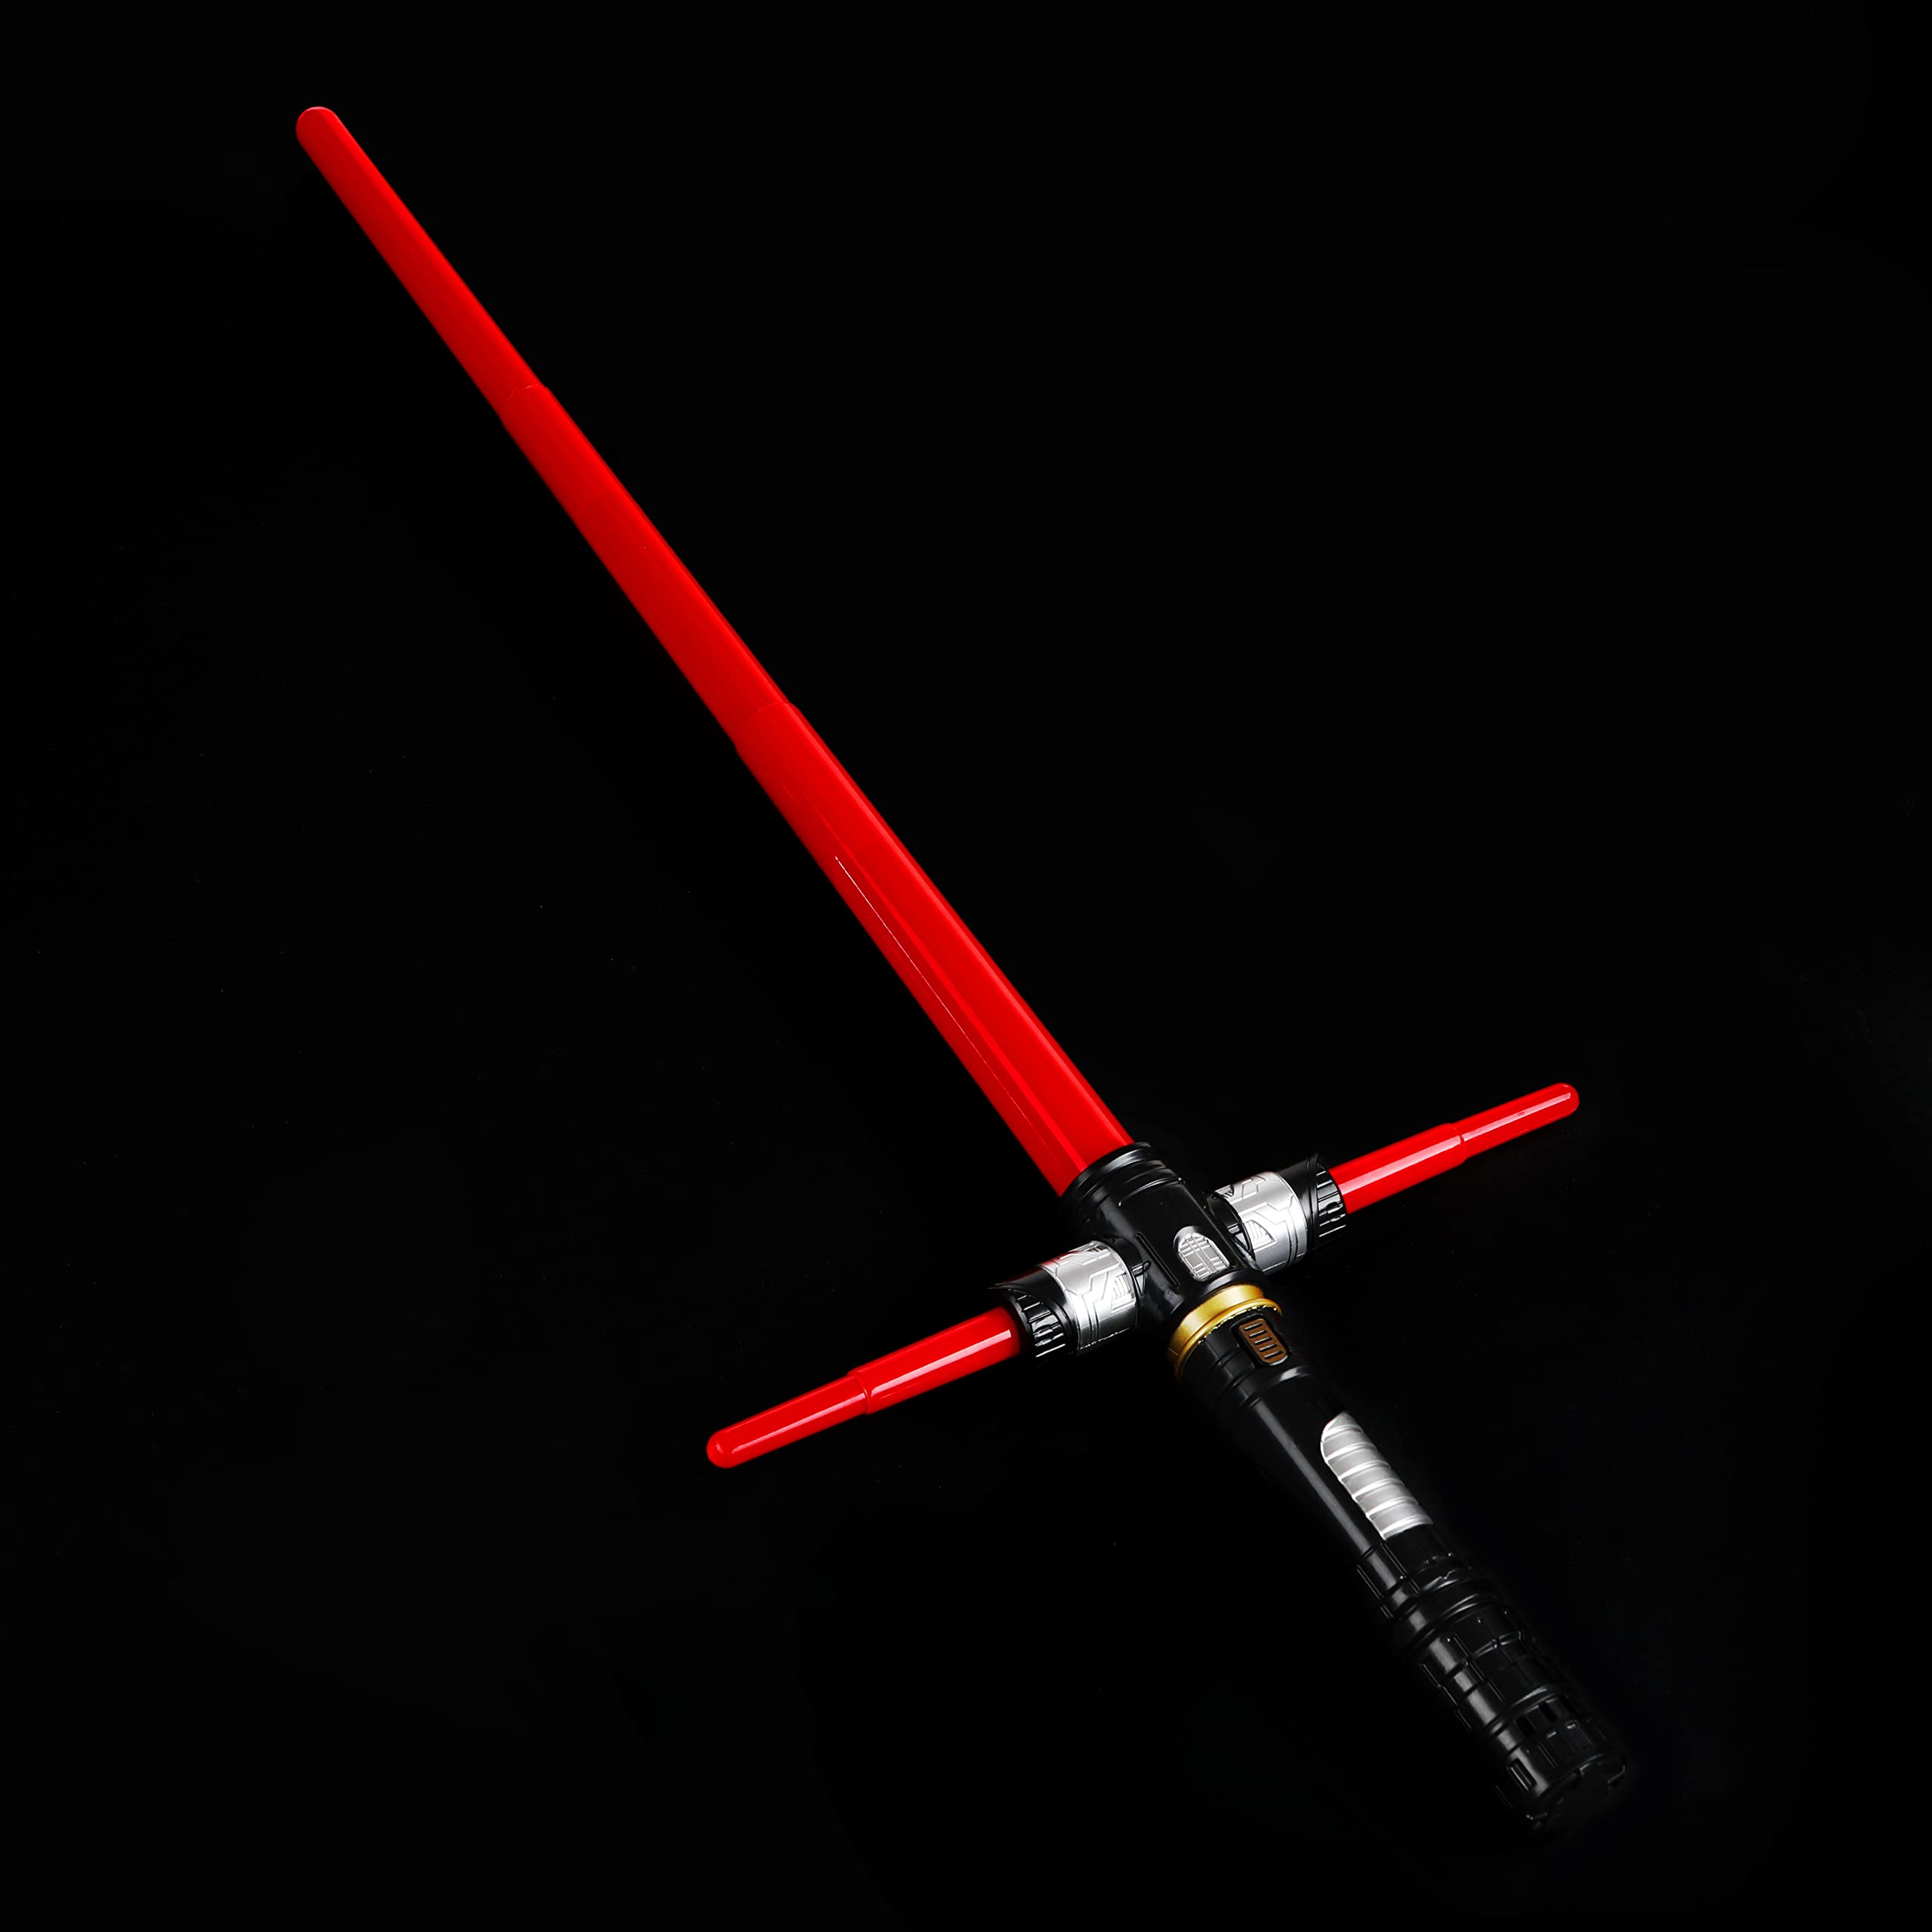 MewduMewdu Light up Saber Toy with Electronic Lights and Sound Effect for Kids and Adults, Red LED Retractable Force FX Saber Sword Toy as Party, Holiday, Birthday Gift